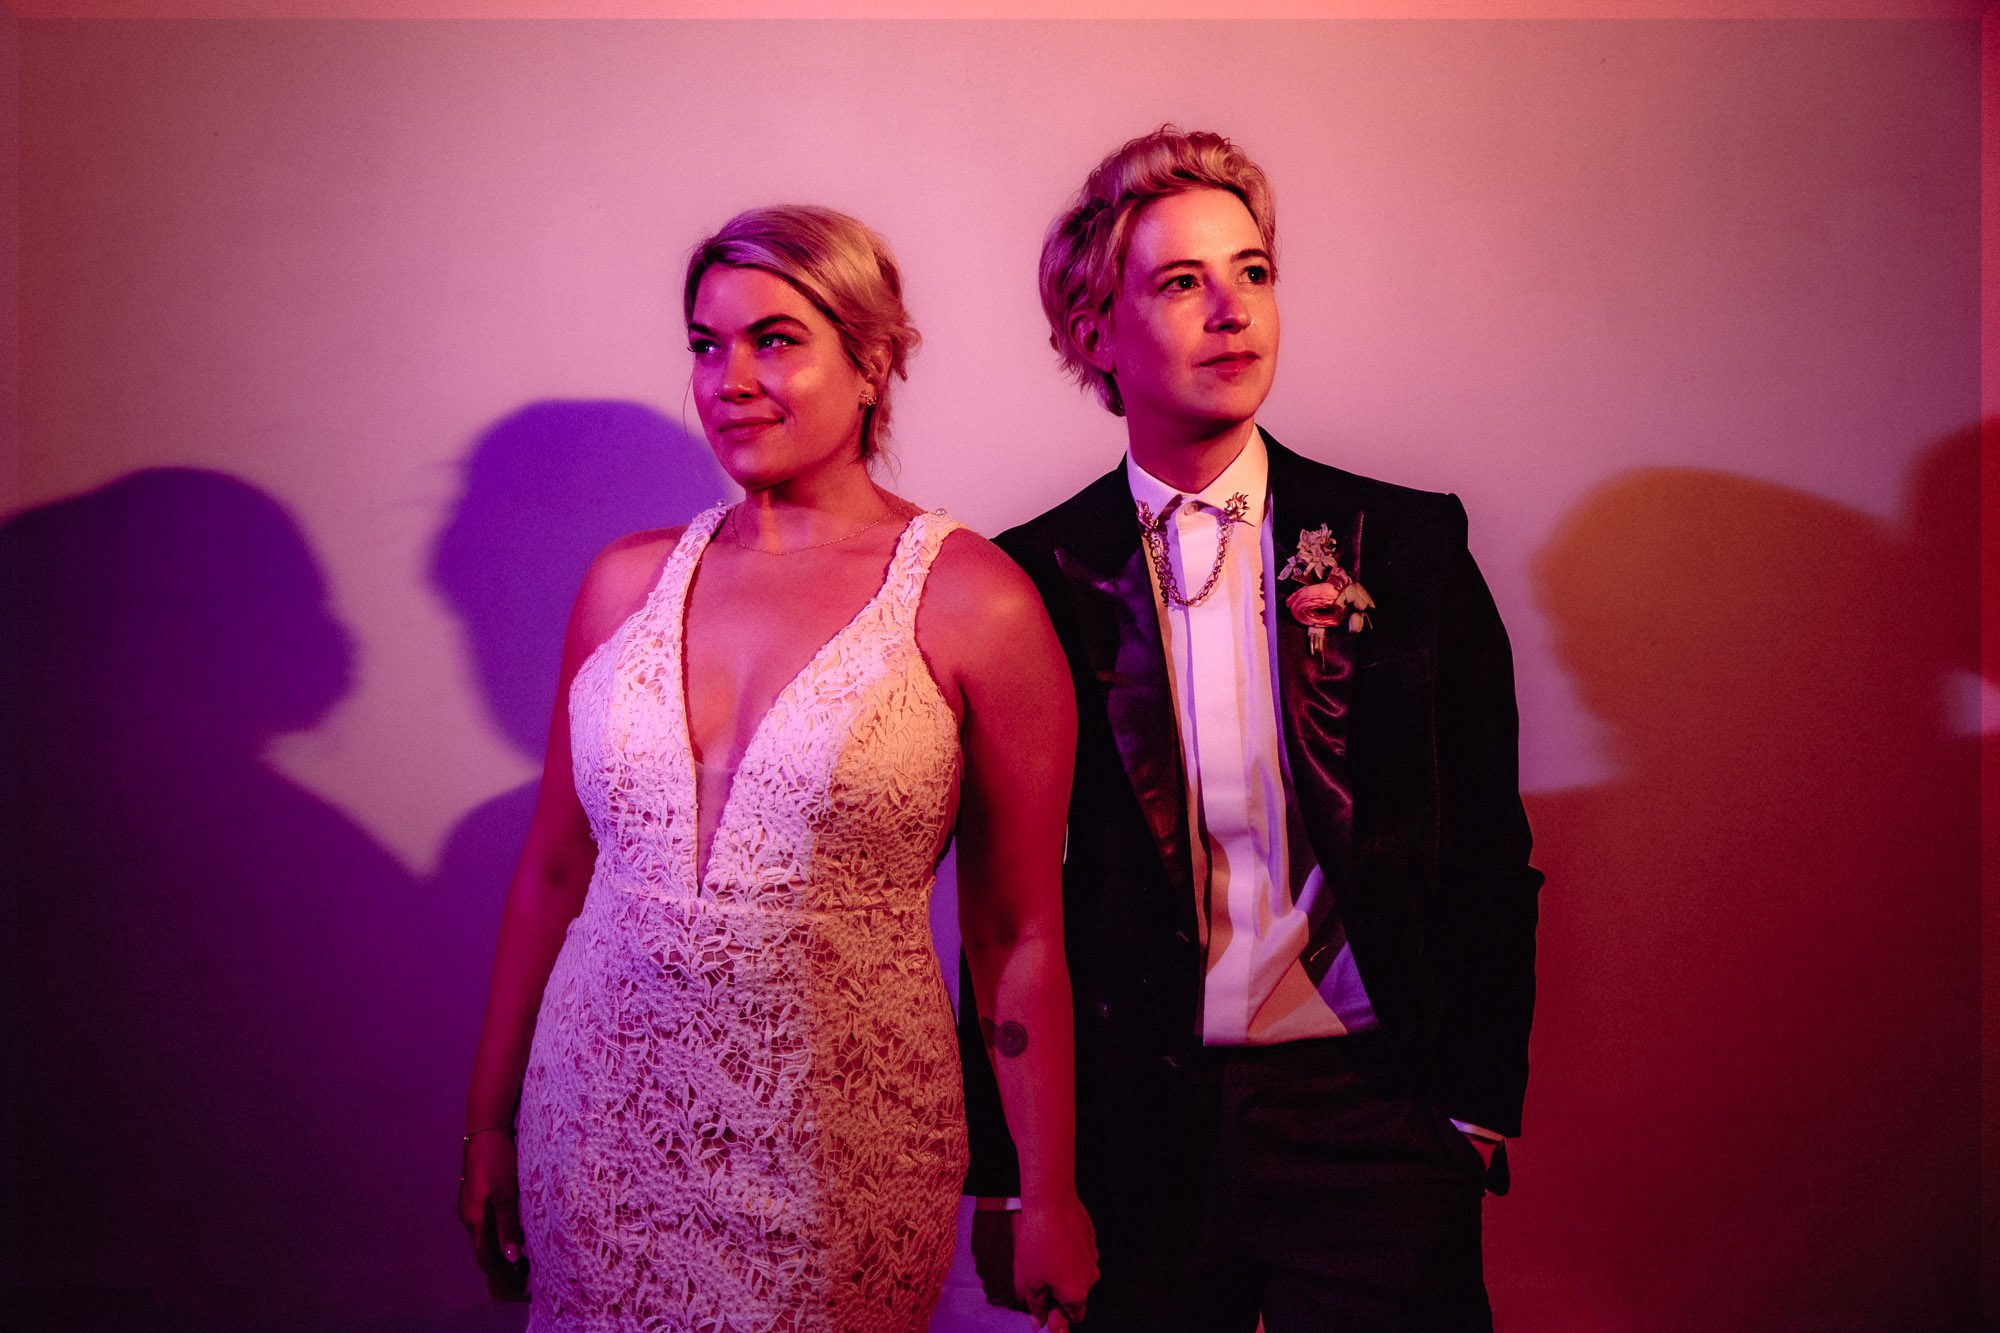 colorfully pink photo of an LGBTQ couple wearing a white wedding dress and a dark suit holding hands and looking up and away from the camera at their Atlanta wedding portrait at Westside Warehouse